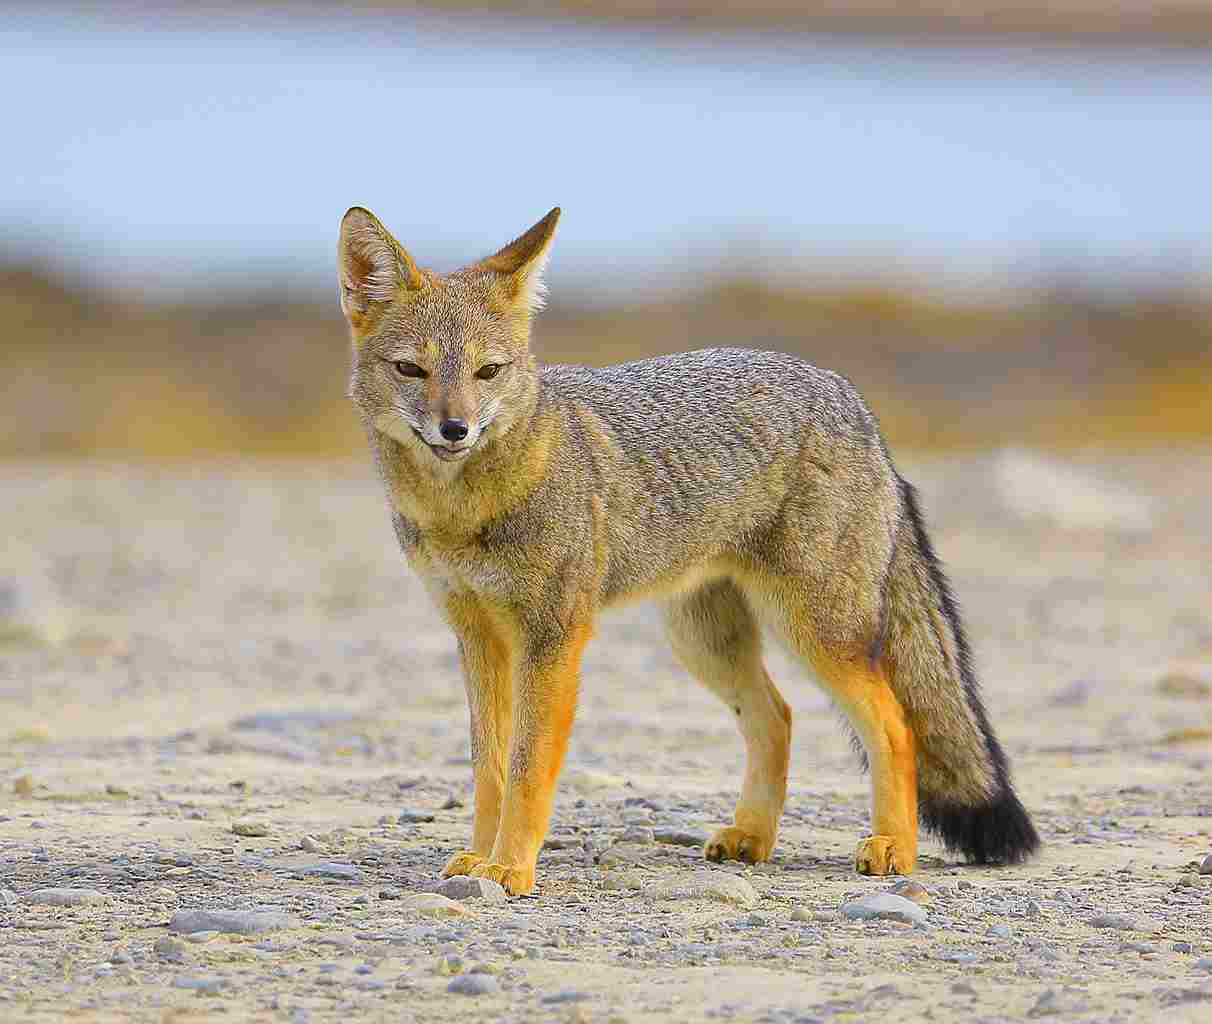 Gray Fox Vs Coyote: Solitary Behavior of the Gray Fox Contrasts With Pack Socialization in Coyotes (Credit: Antony King Photography 2018 .CC BY-SA 4.0.)